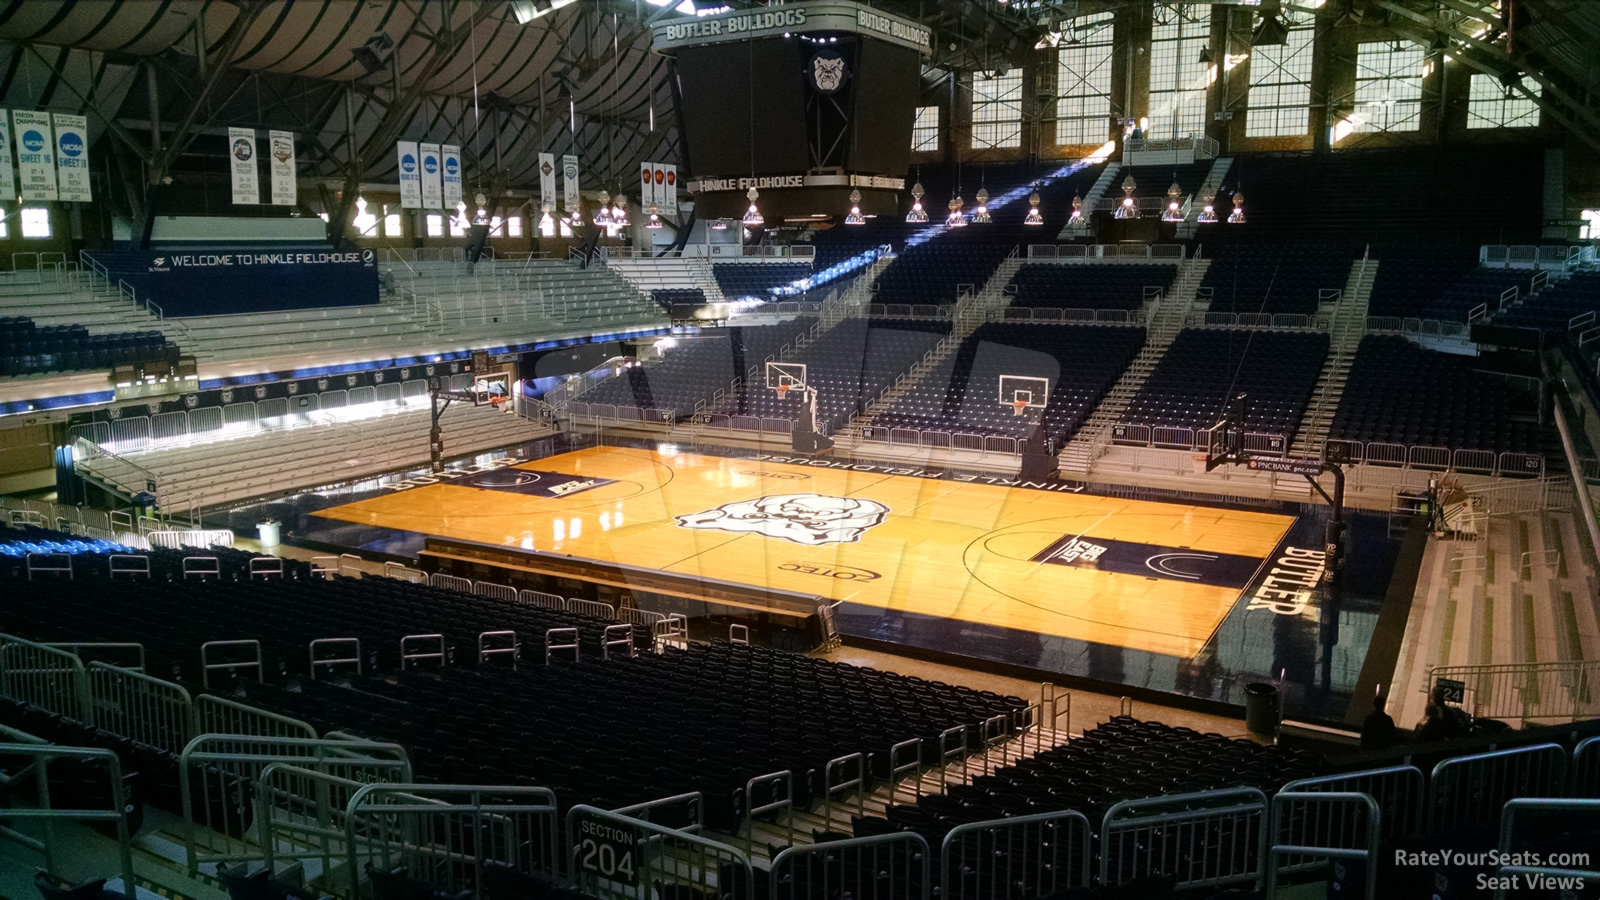 section 204, row 9 seat view  - hinkle fieldhouse